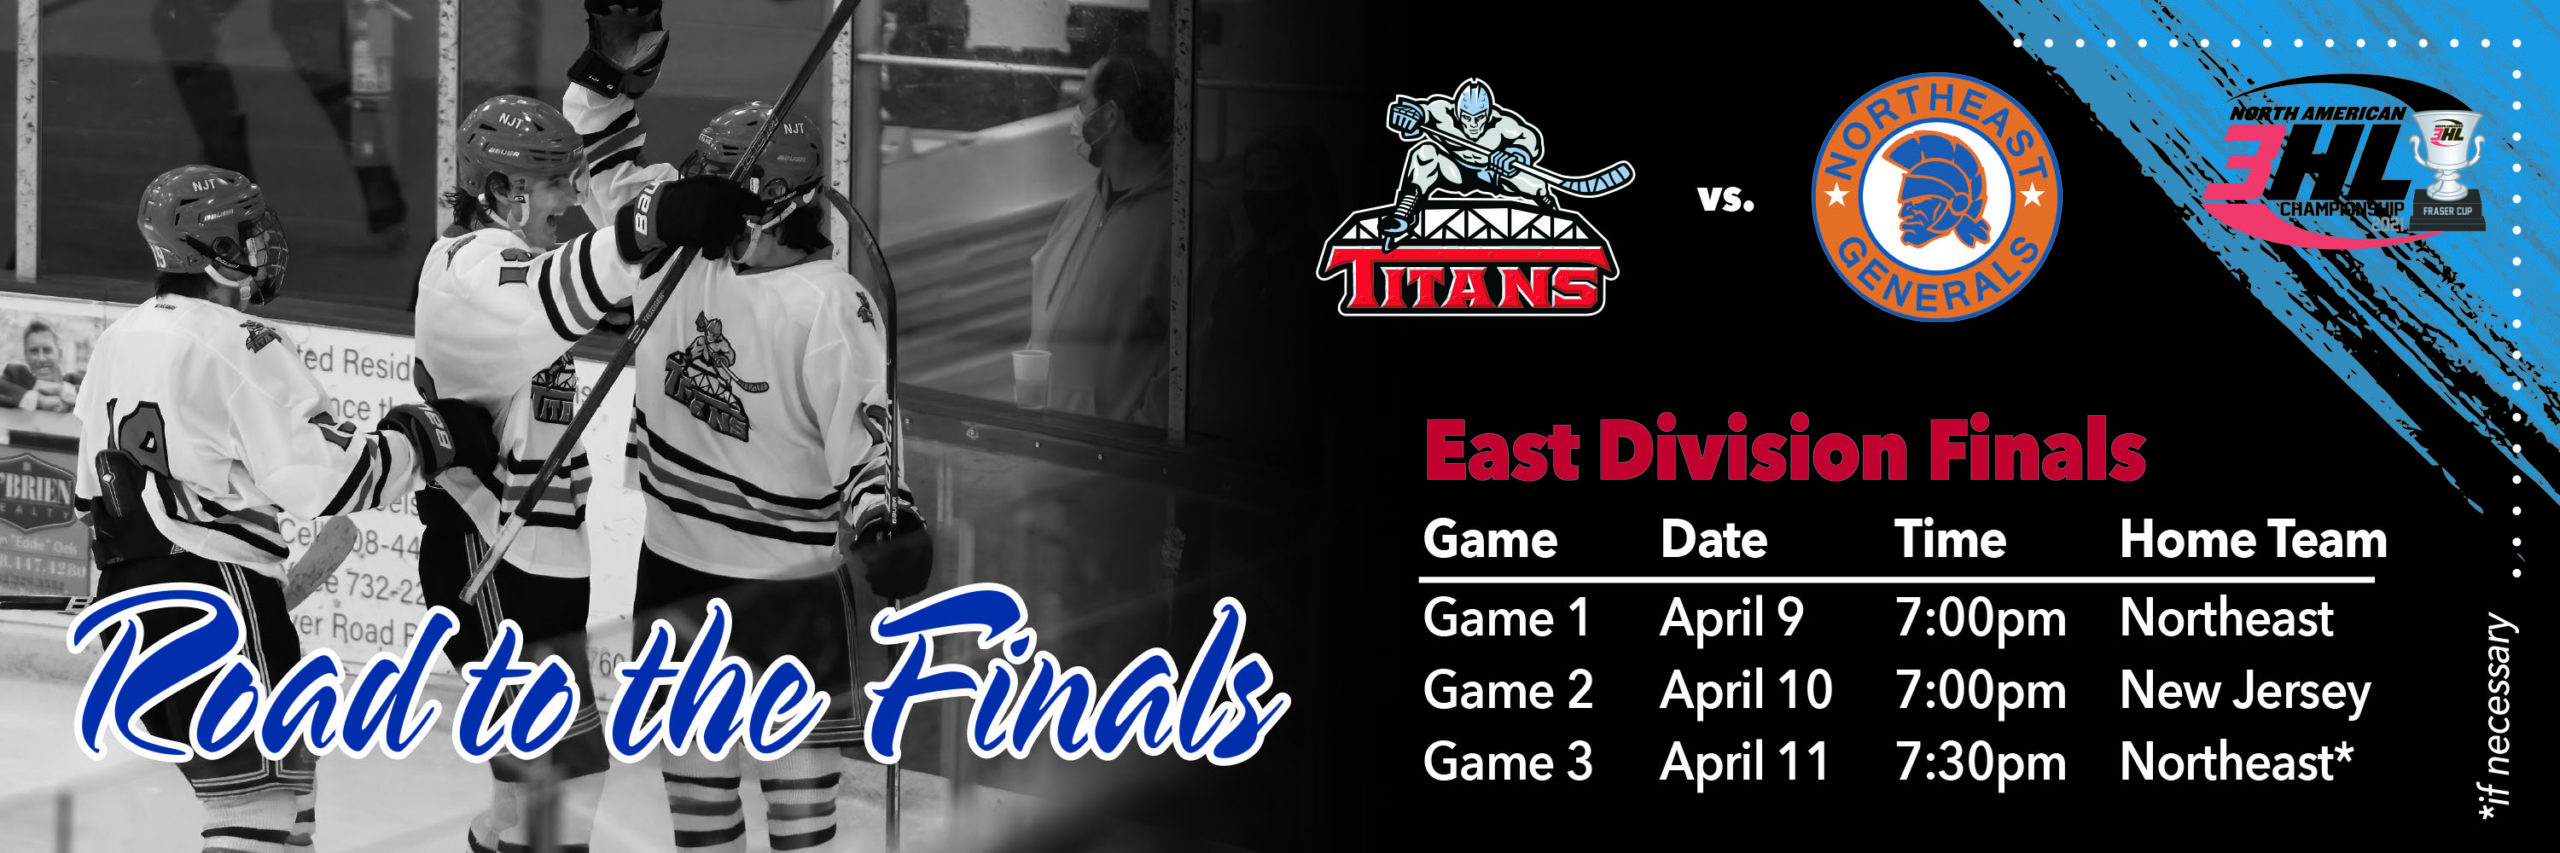 Titans’ Fraser Cup East Division Final schedule against Northeast is set